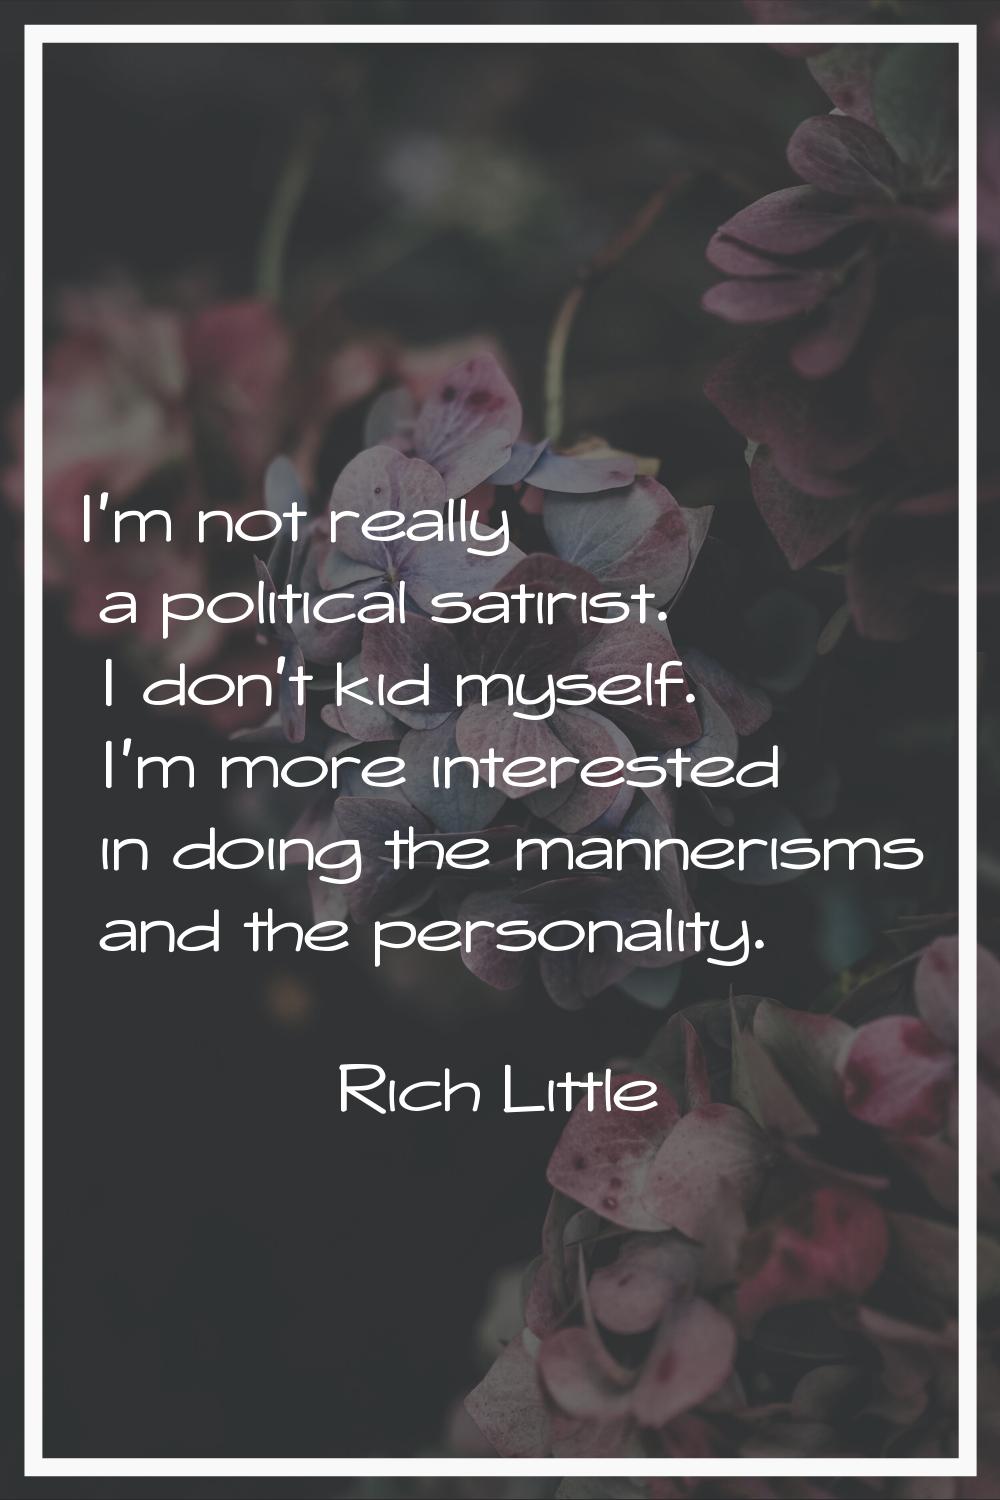 I'm not really a political satirist. I don't kid myself. I'm more interested in doing the mannerism